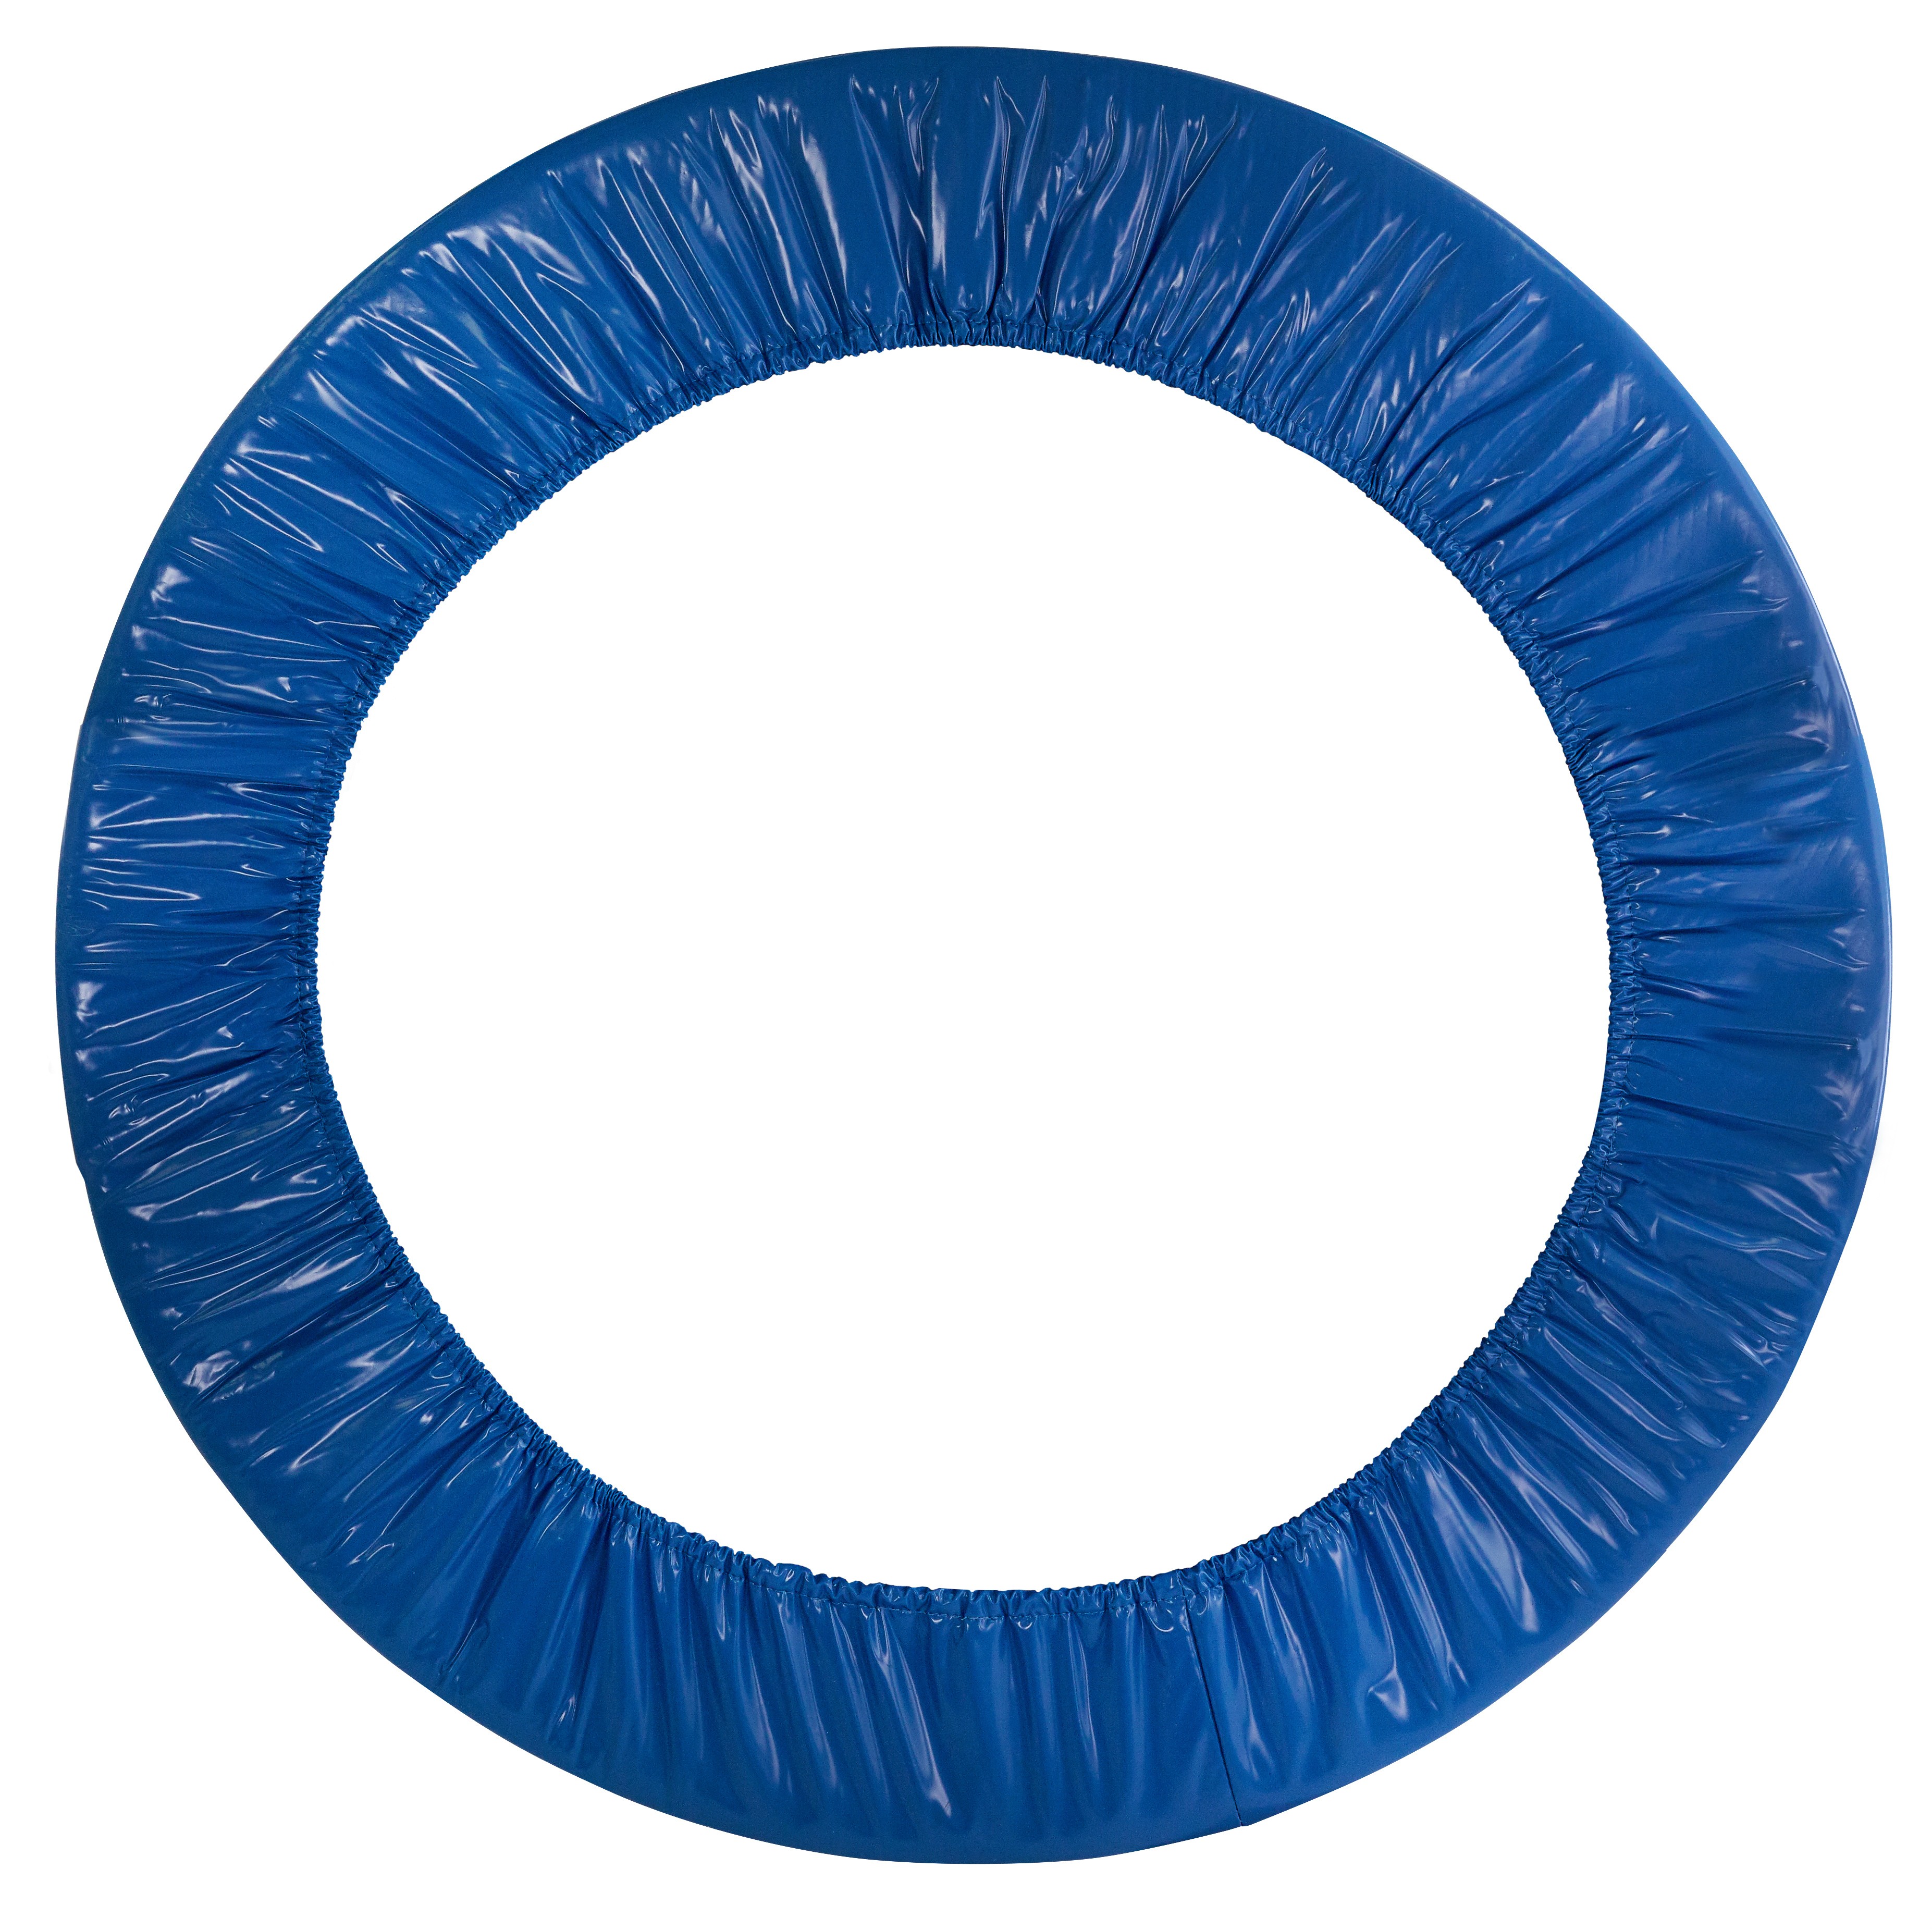 44" / 112cm Mini Round Trampoline Replacement Safety Pad (Spring Cover) for 6 Legs - Blue